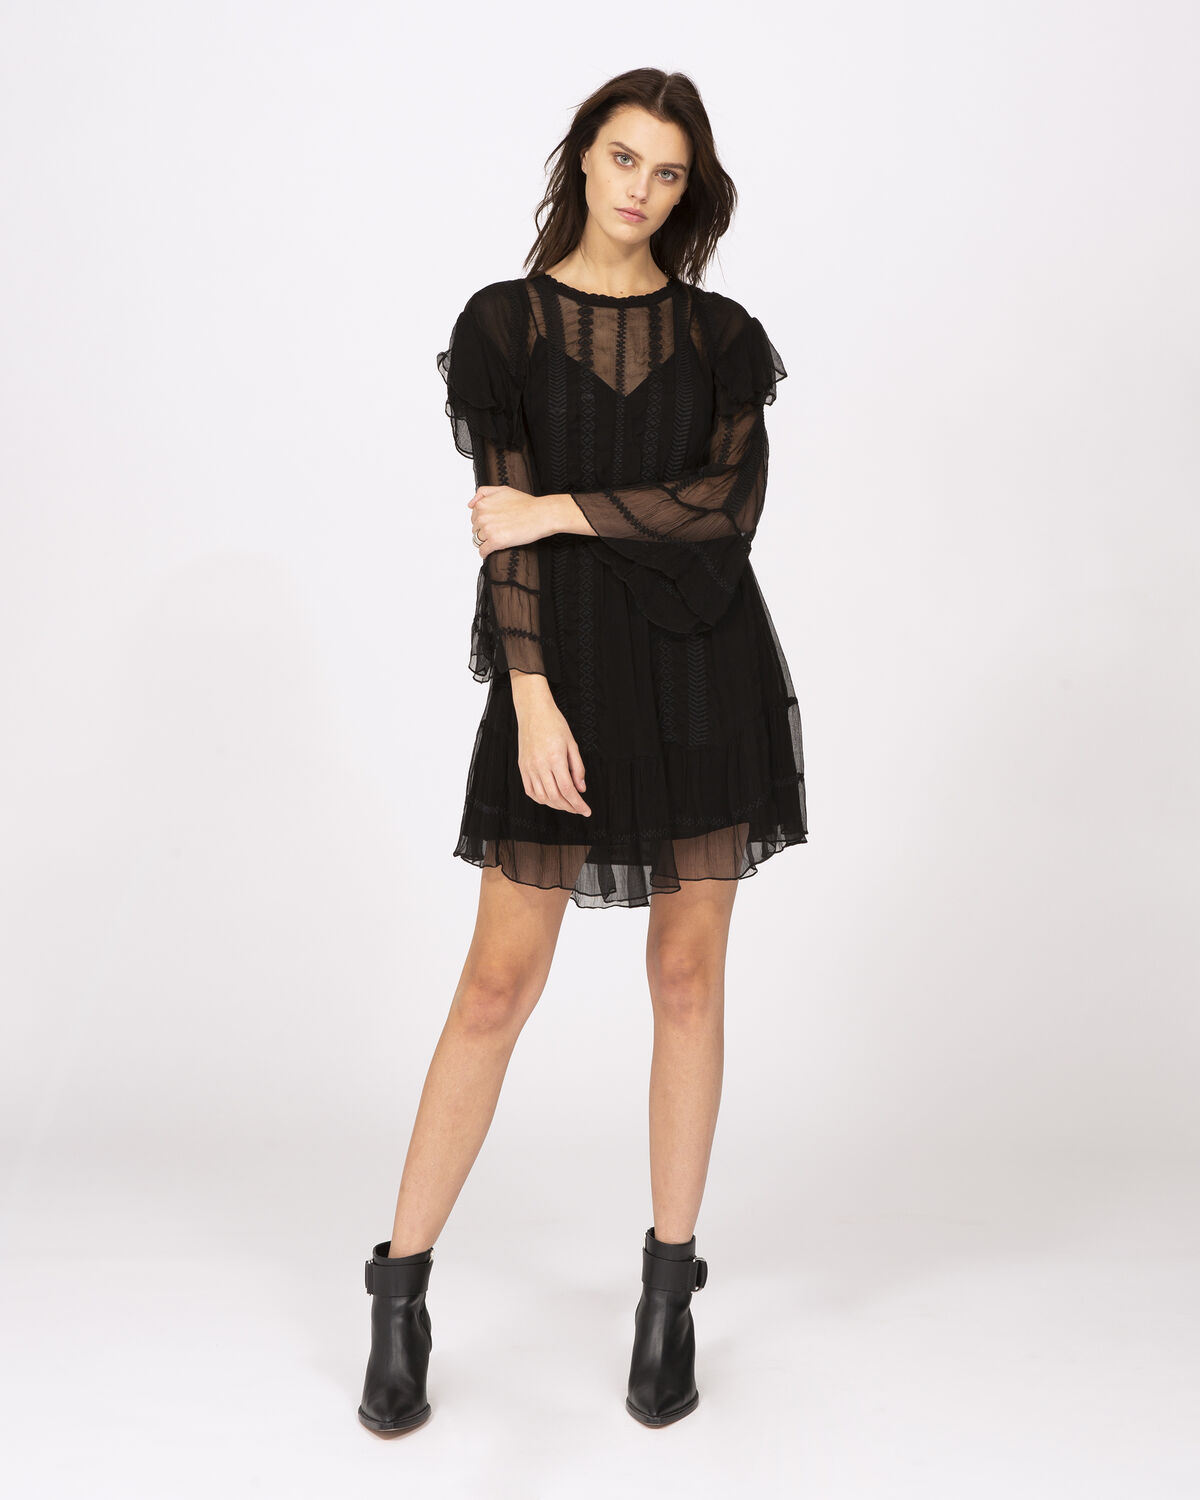 Photo of IRO Paris Western Dress Black - This Short Dress With 3/4 Sleeves Is Distinguished By Its Transparency And Multiple Flounces. With Its Delicate Embroidery, It Is The Ideal Piece For A Glam-rock Look. Dresses